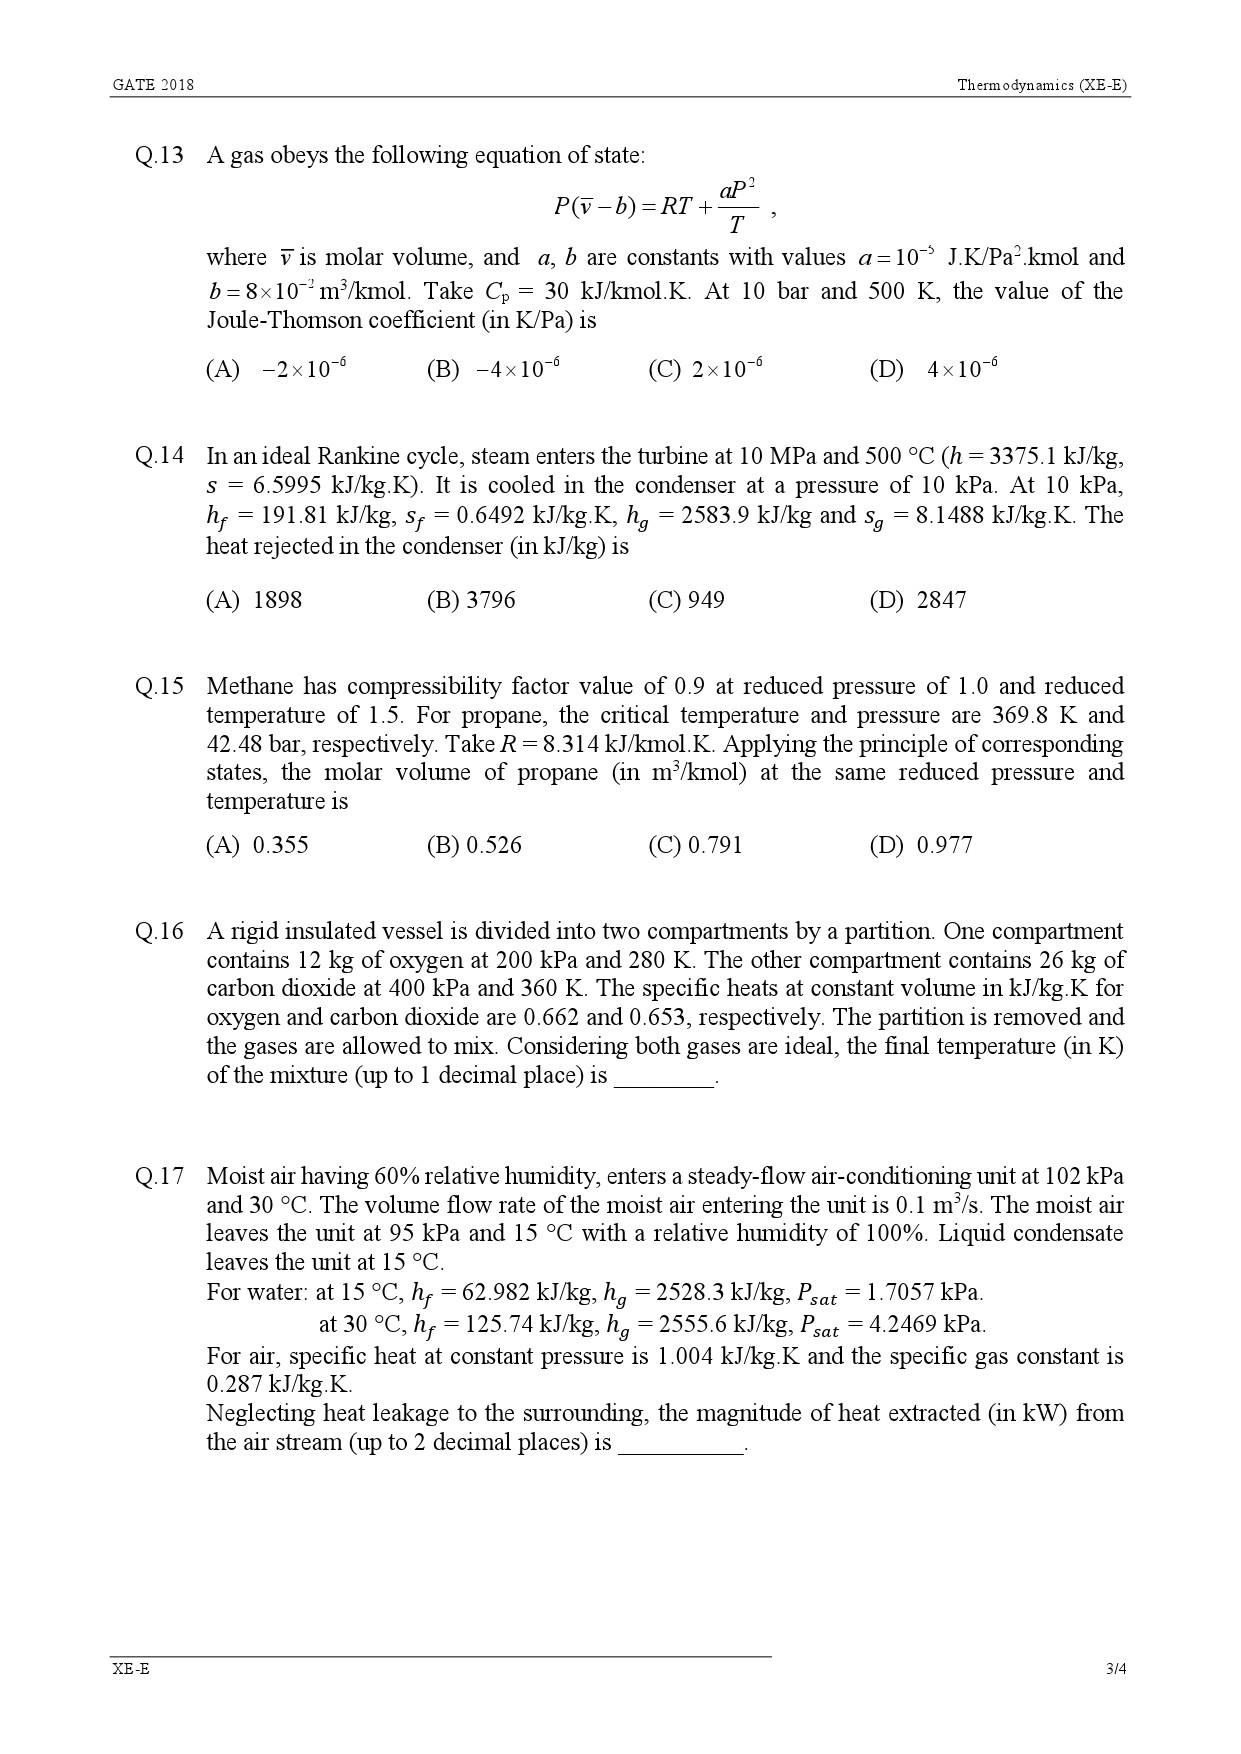 GATE Exam Question Paper 2018 Engineering Sciences 24